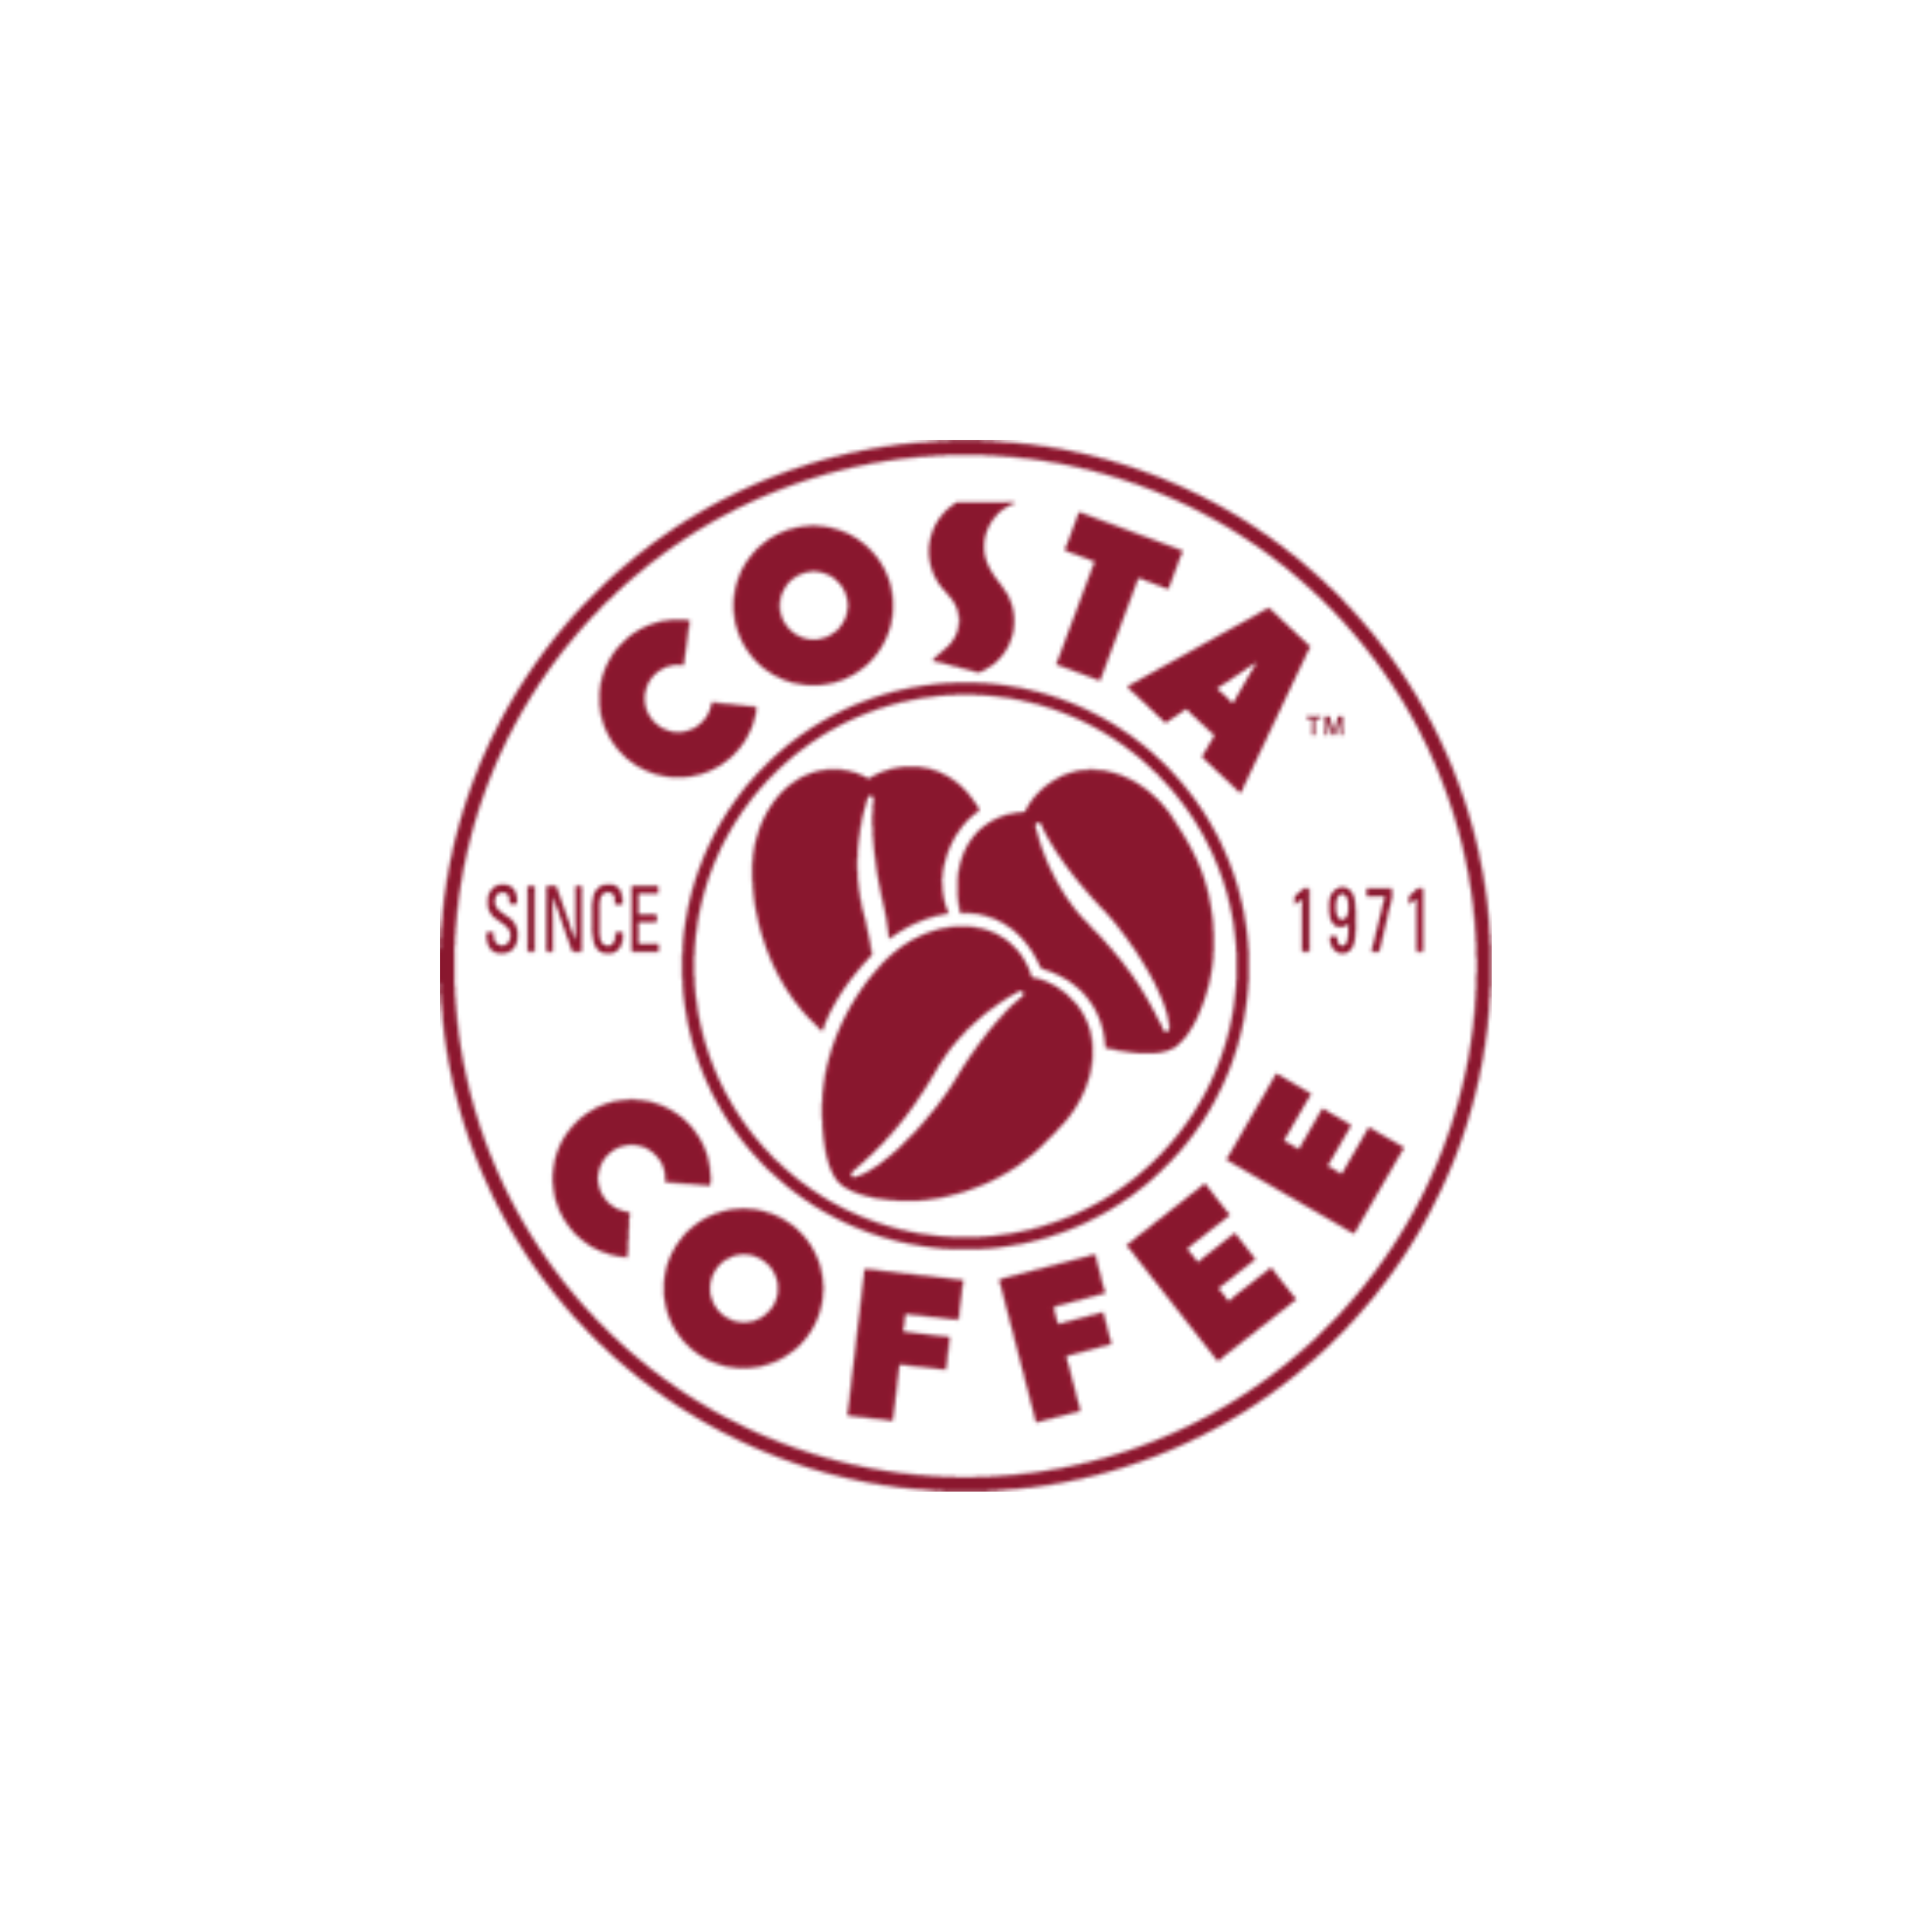 Tessier-employment-icons-Costa.png